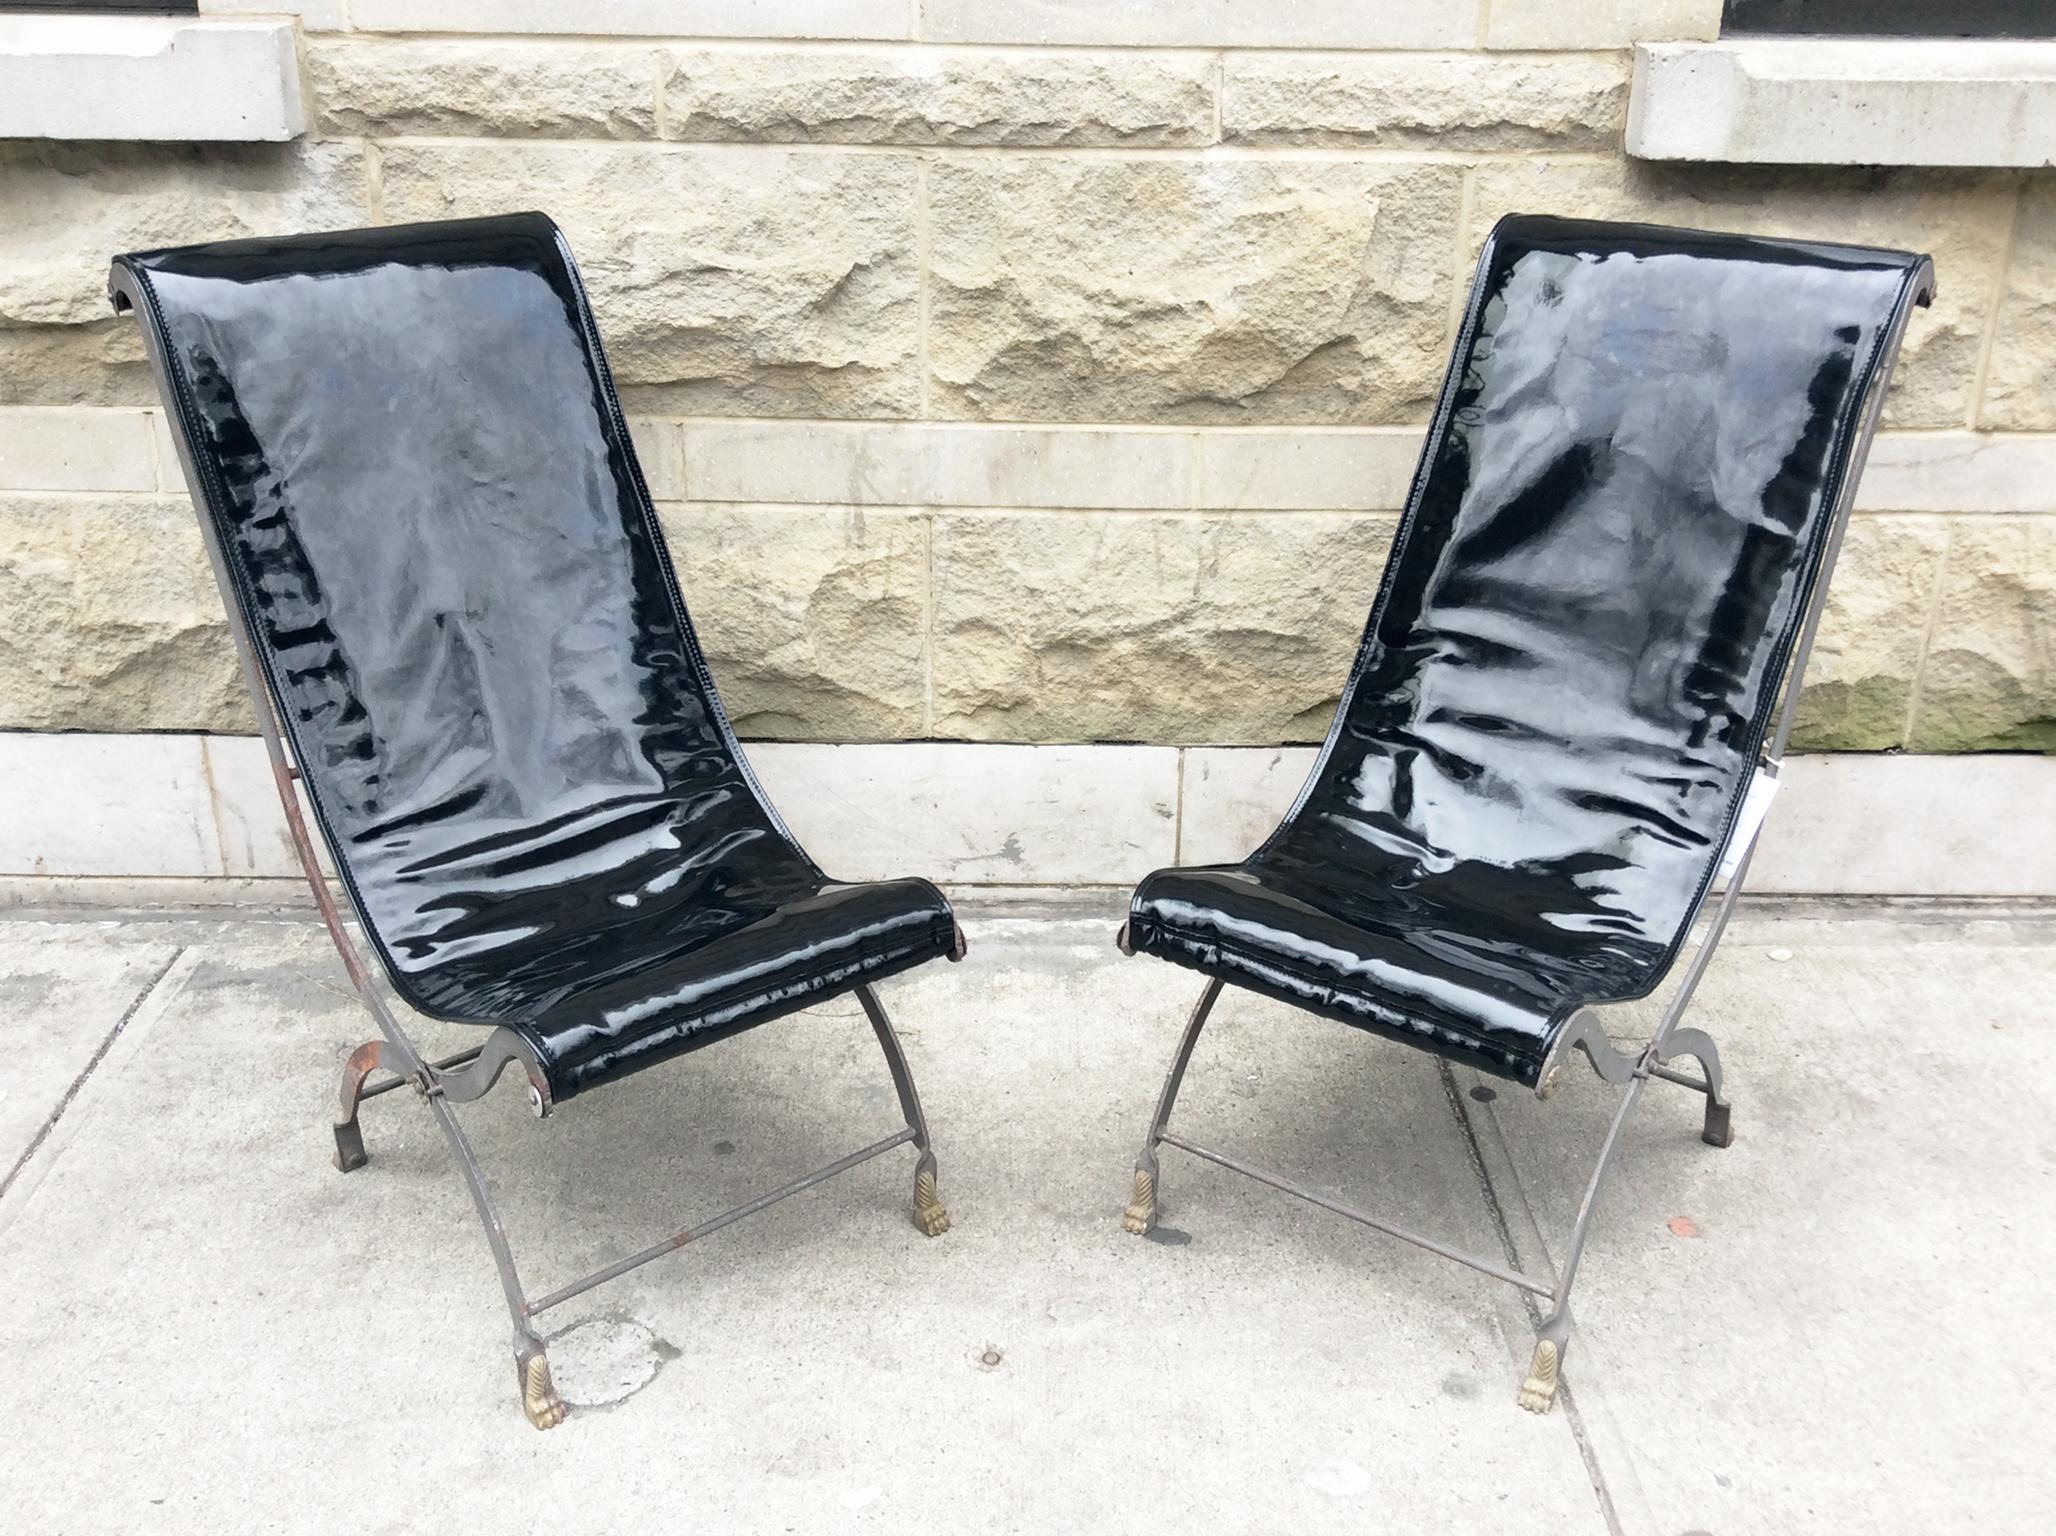 A very alluring and unique pair of armless folding lounge chairs designed in the manner of Maison Jansen. The chairs' frames were crafted in the early 20th century. They are re-imagined in a modern form with new black patent leather upholstery. The